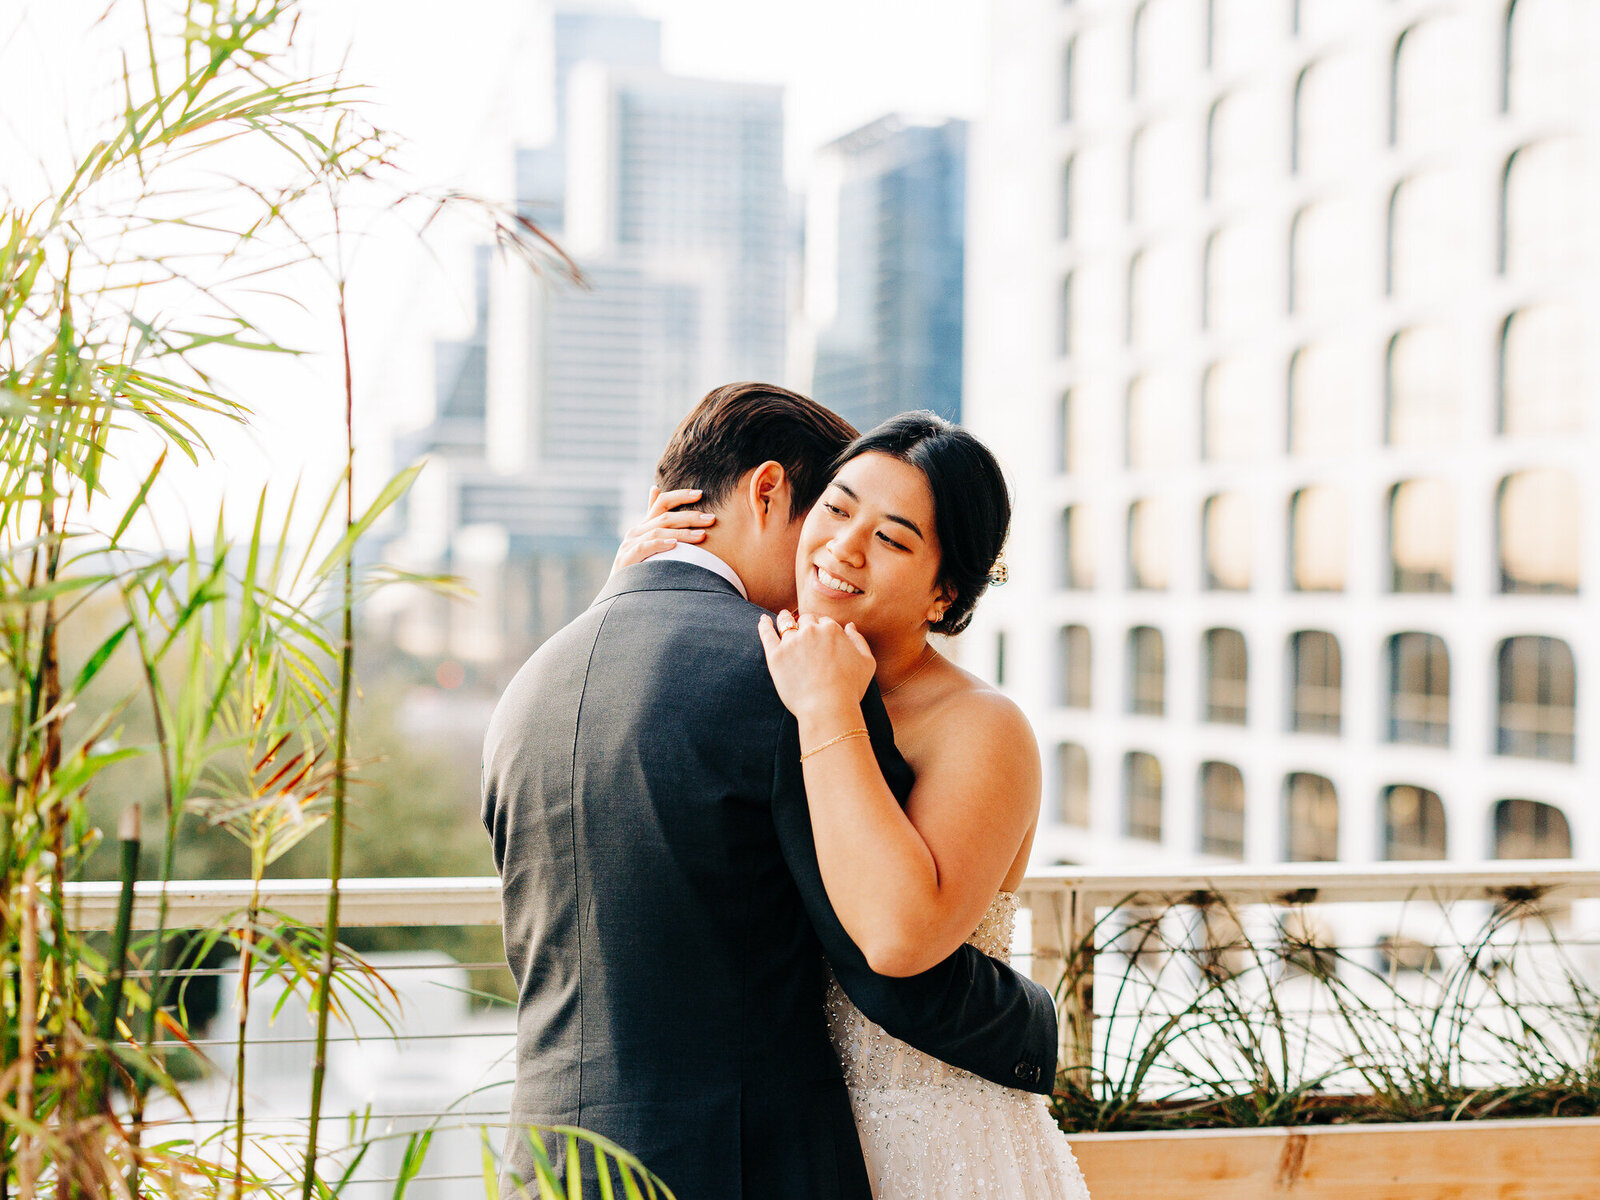 This image features a Vietnamese couple at a hotel in their wedding attire. The groom is wrapping around his bride at the waist as she wraps around him, resting one hand on his shoulder and the other on the back of his neck. The groom is softly kissing her neck. The image was taken by Denver Wedding Photographer KD Captures.